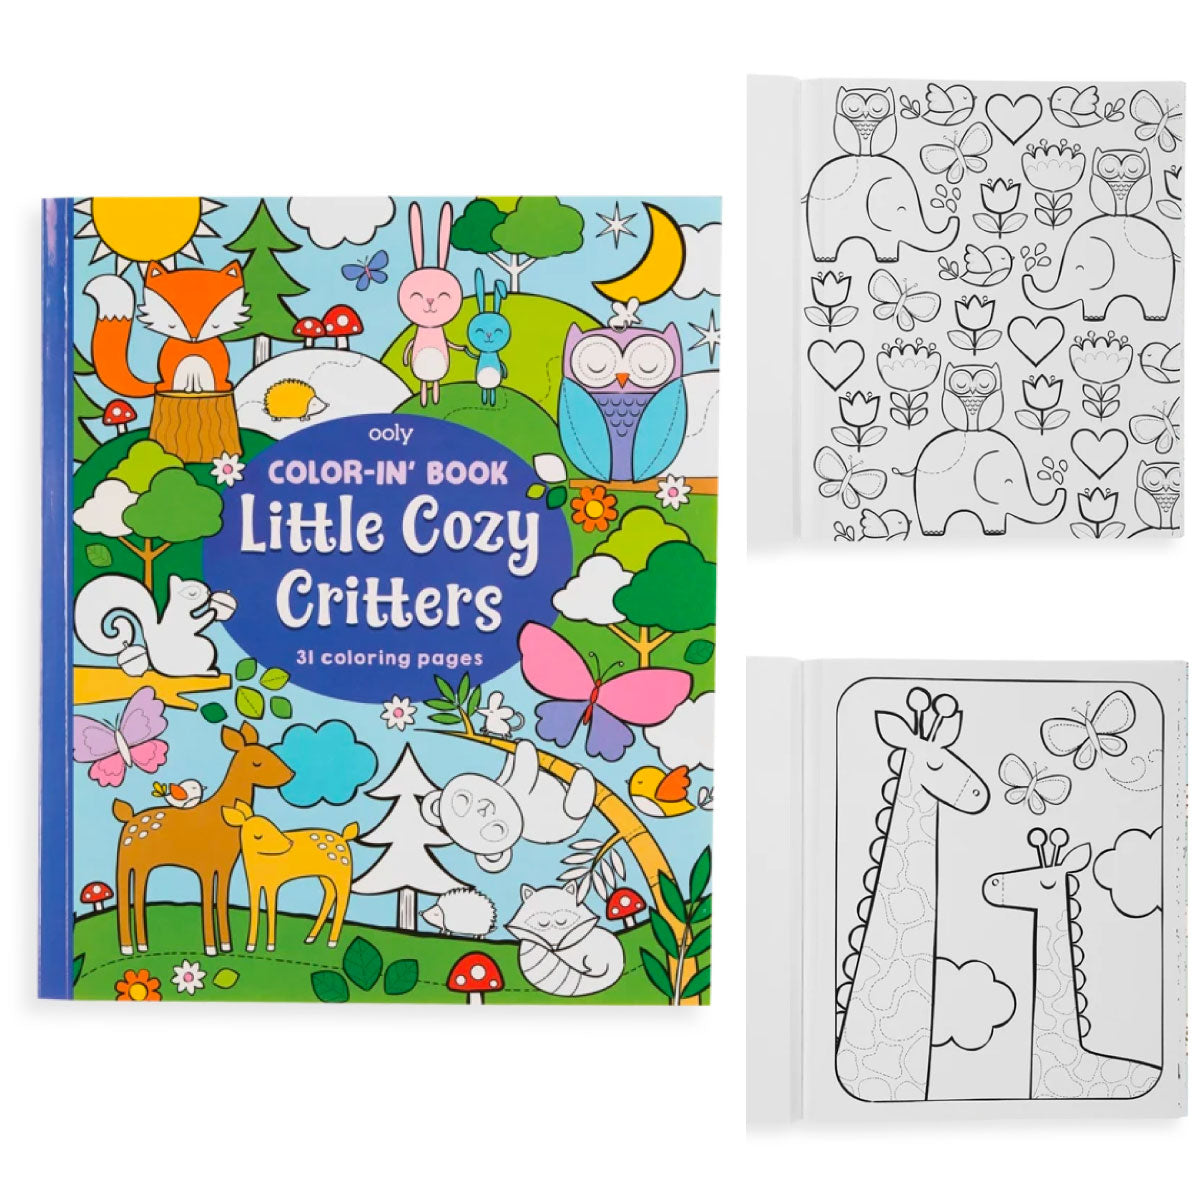 Little Cozy Critters Color-In' Book from Ooly